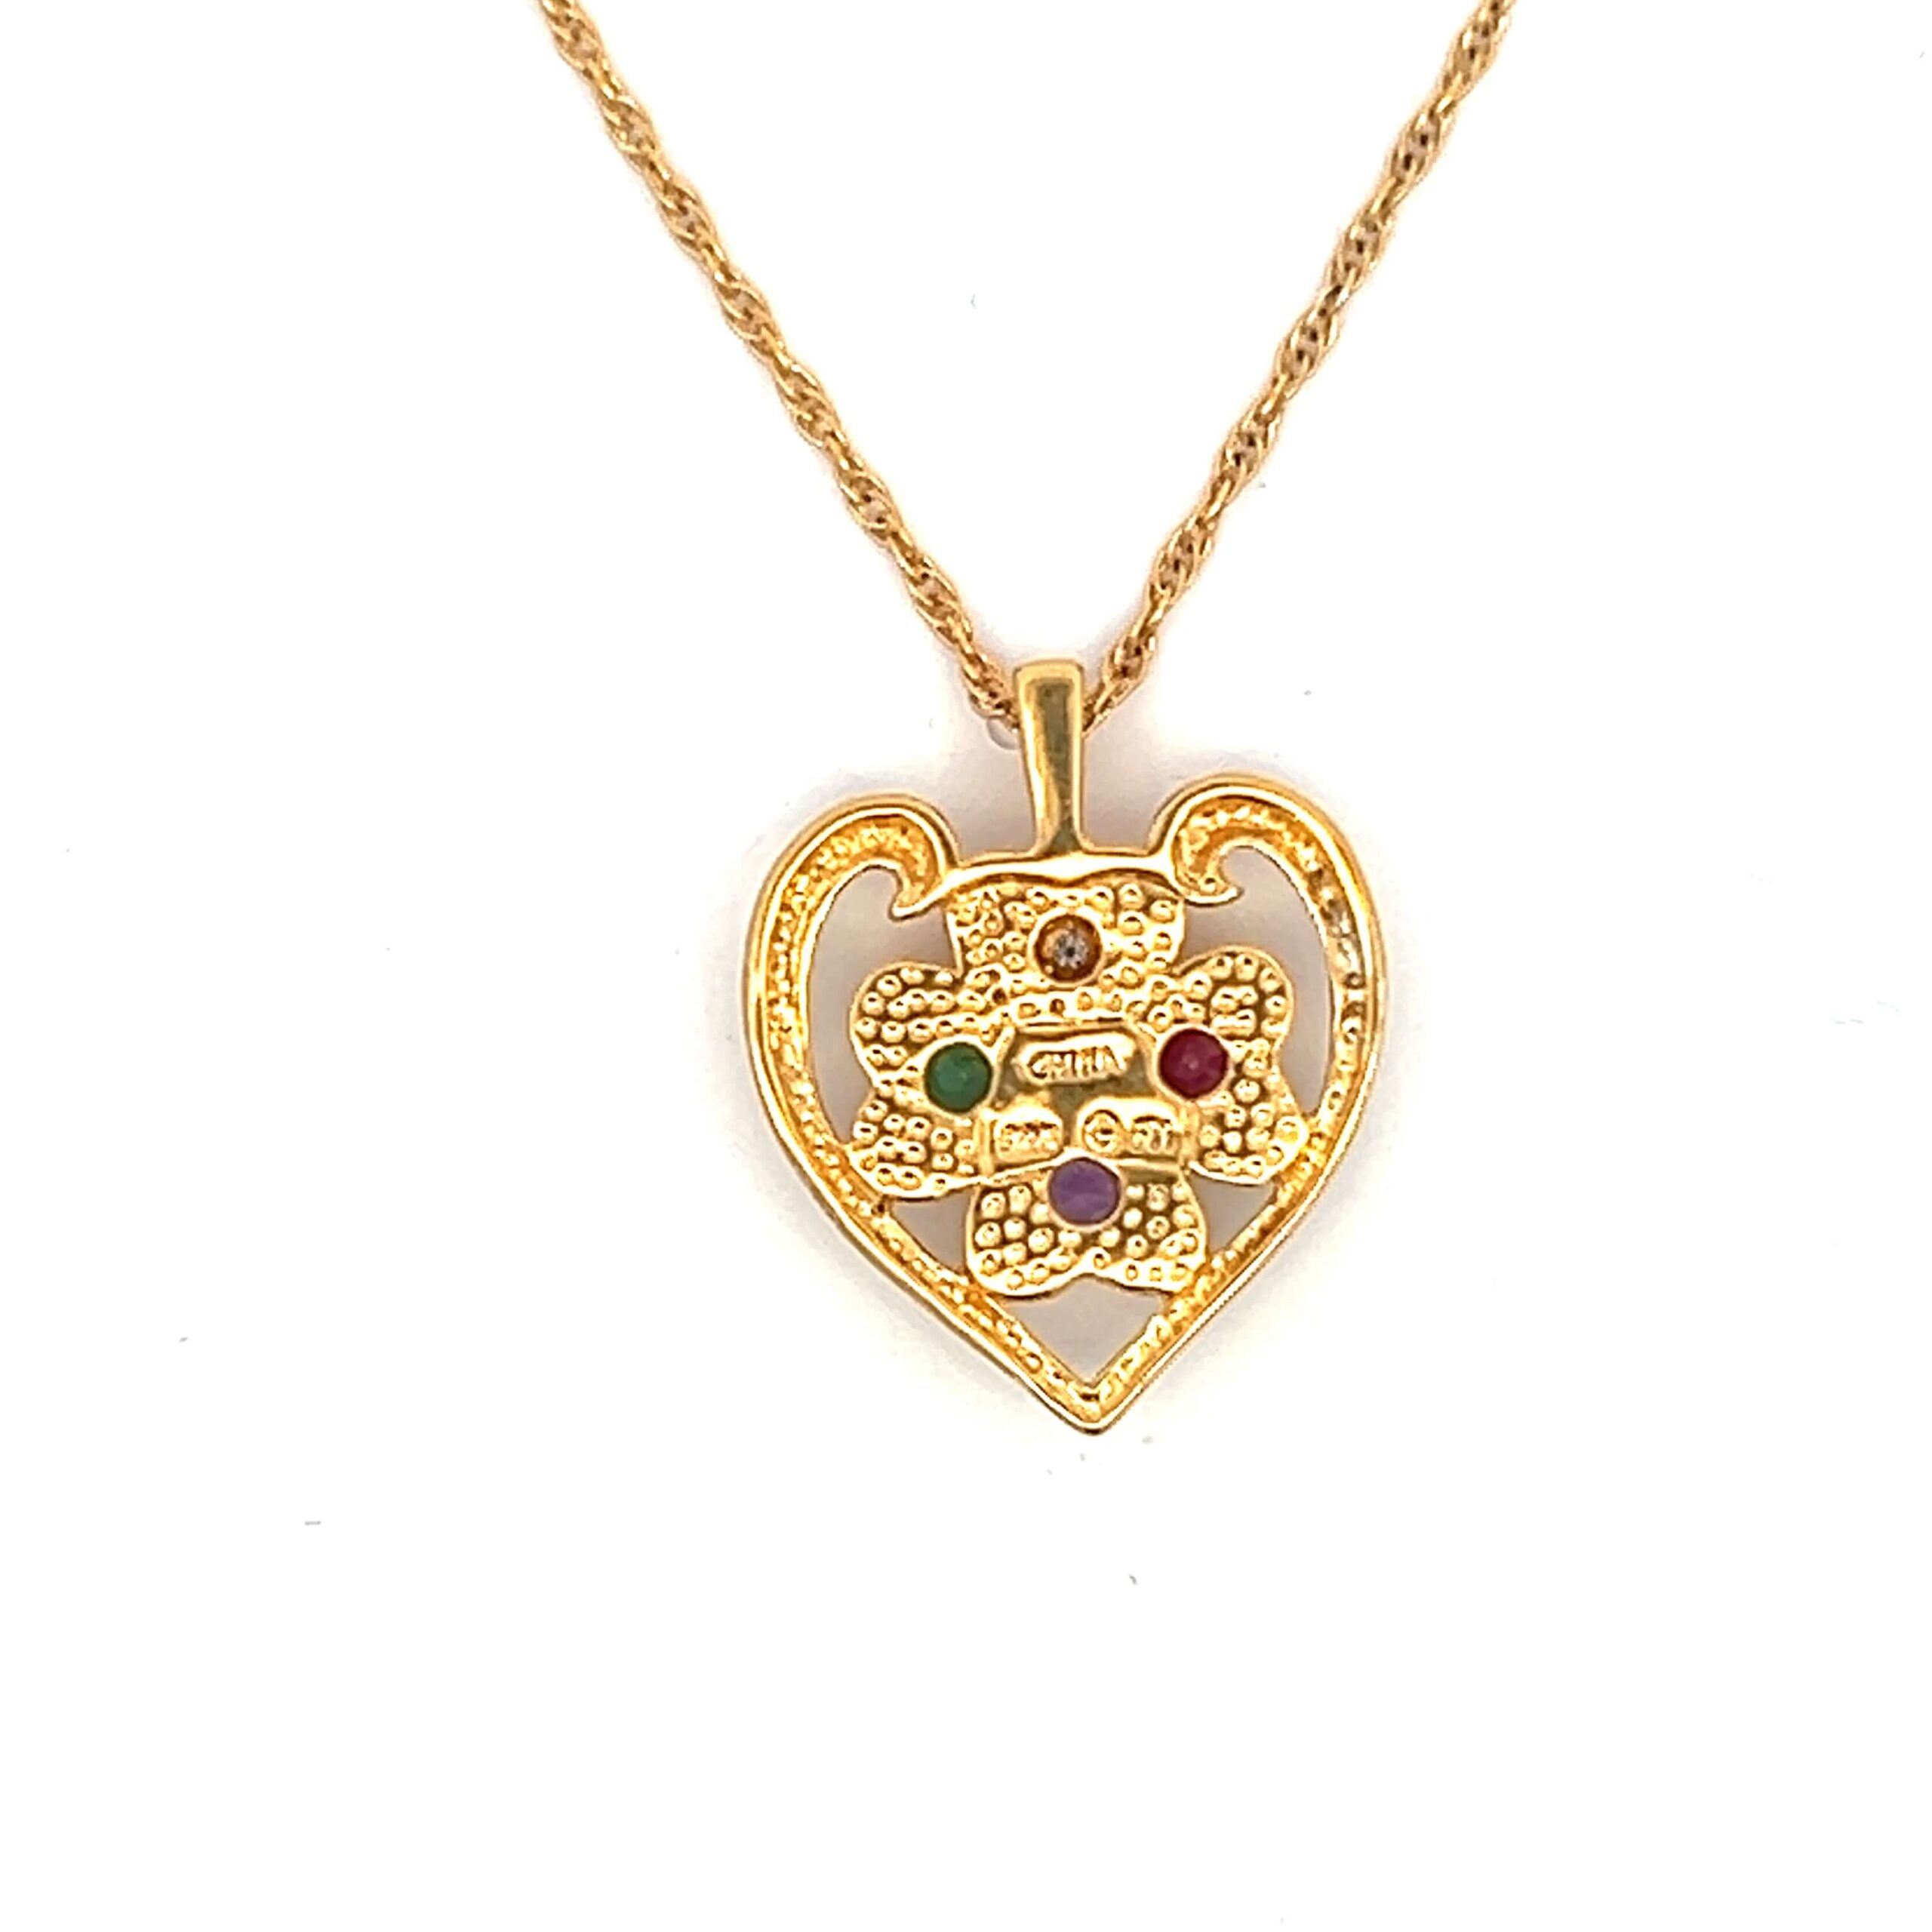 Estate vermeil pendant necklace with an ornate heart pendant set with a 3 round faceted 2.5mm gemstones including an amethyst, ruby, and emerald, and 1 round brilliant diamond weighing 0.02 carat on a 17" vermeil rope chain